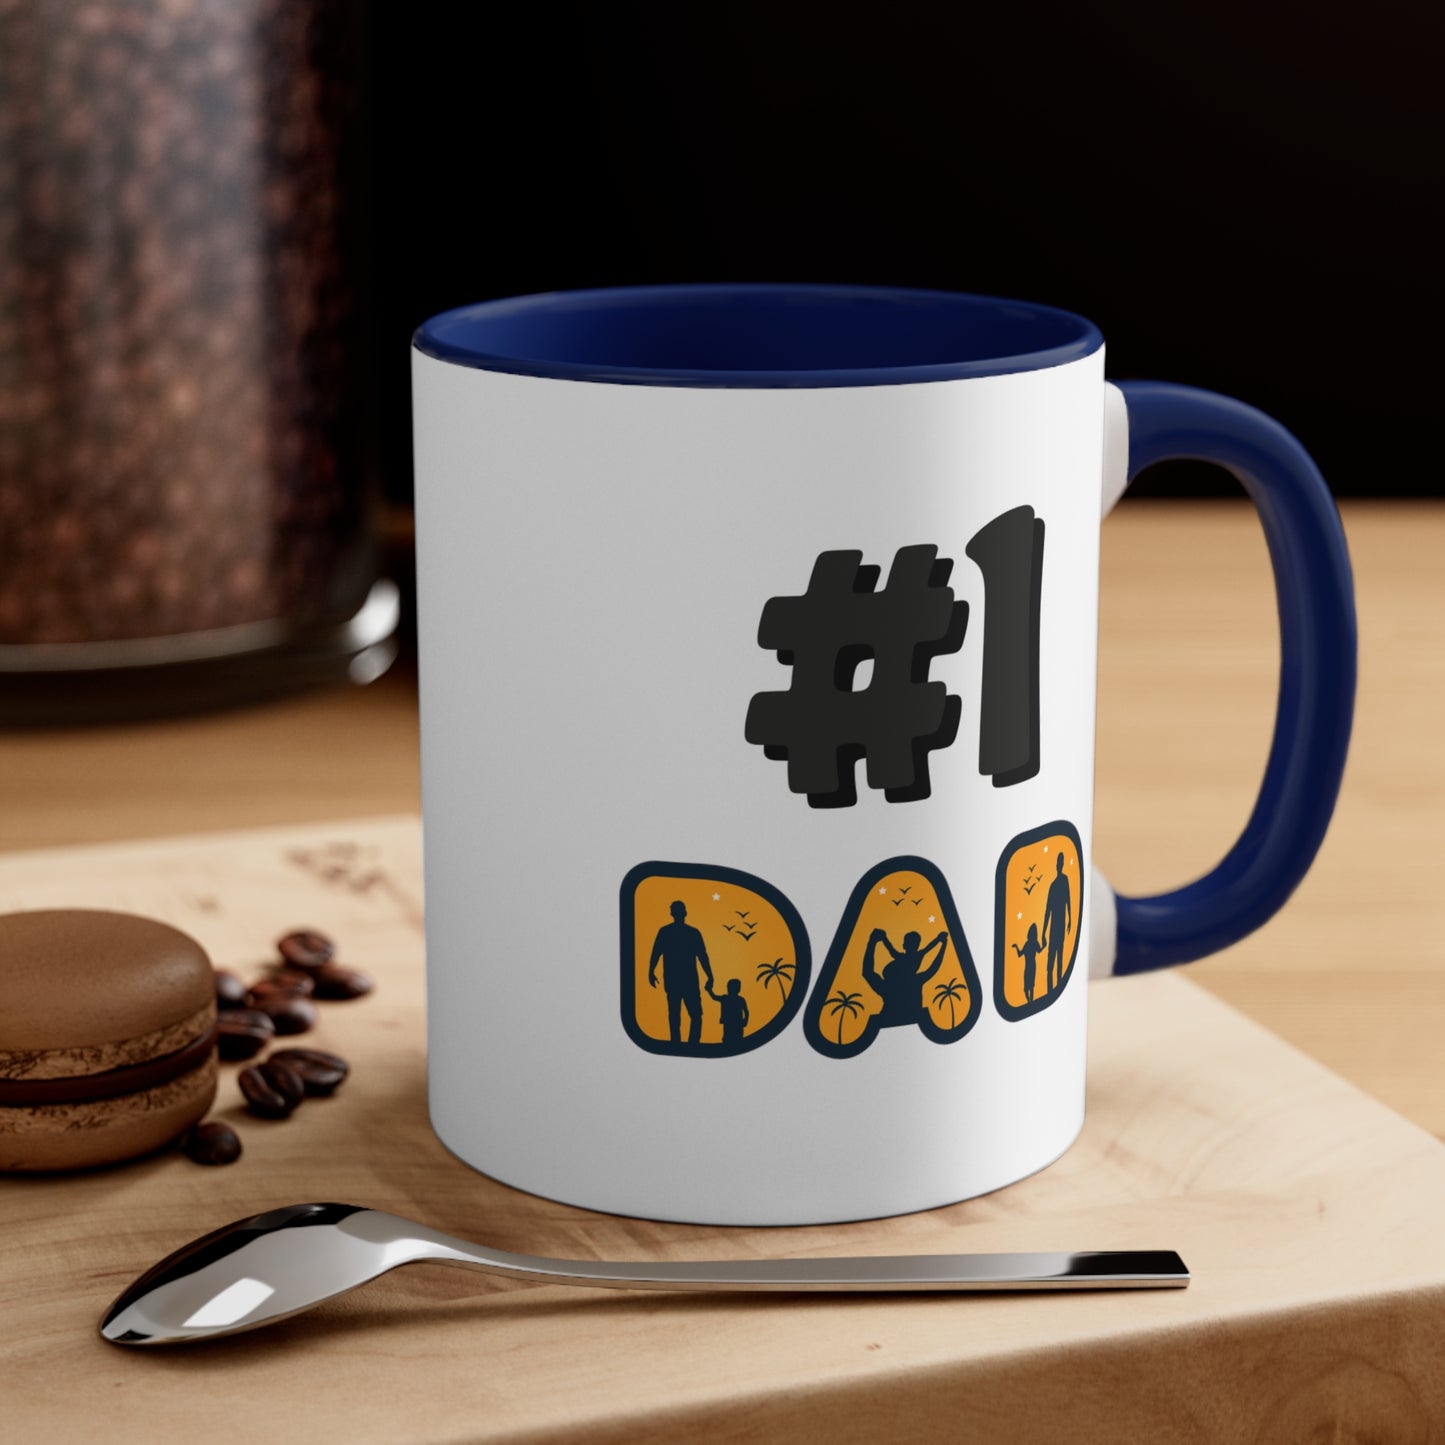 Best #1 Dad Accent Coffee Mug - White and Blue